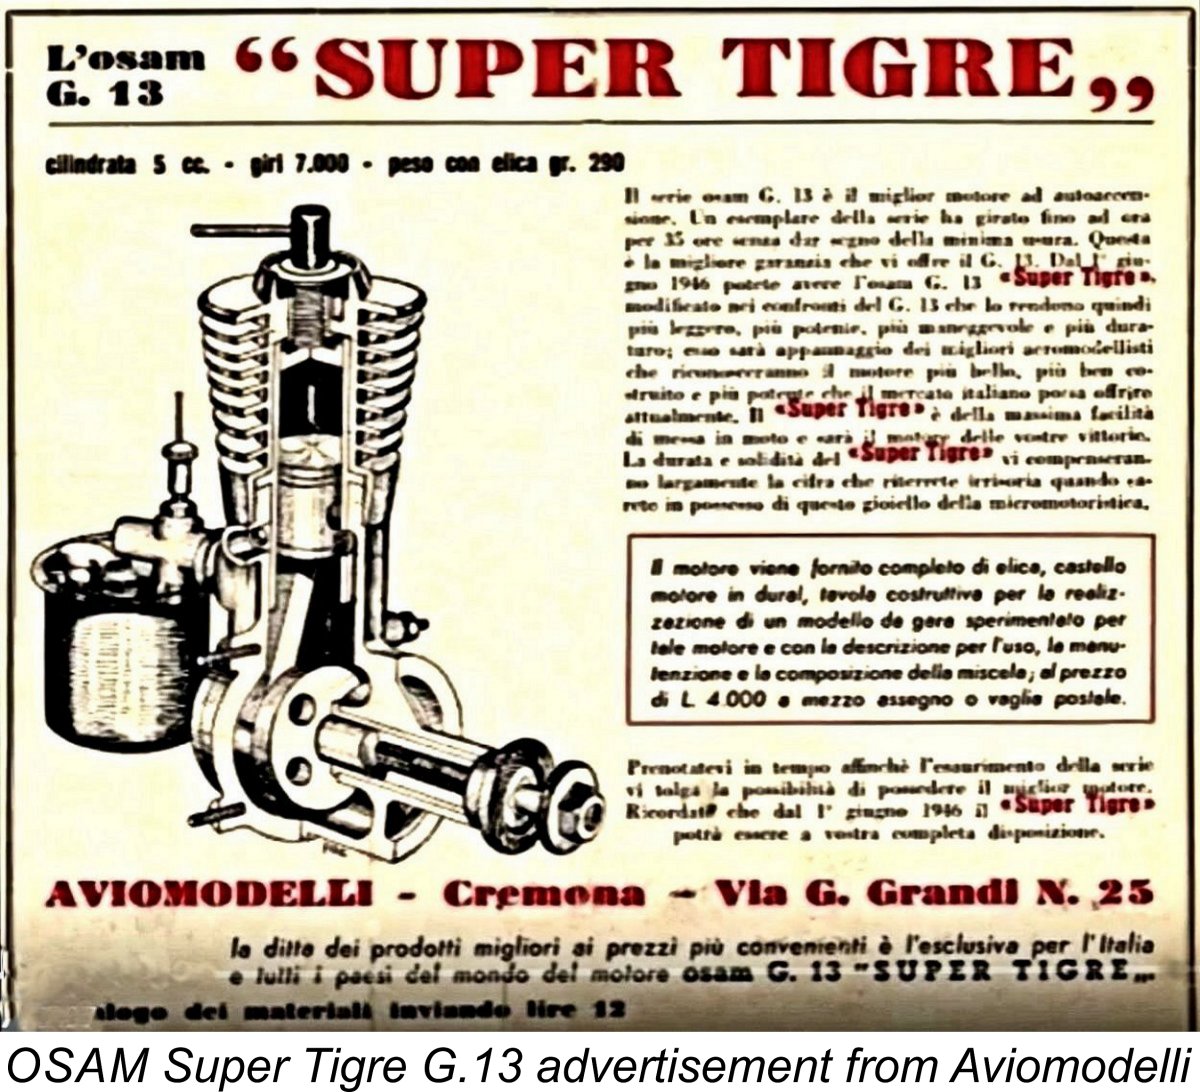 Toys Hobbies Super Tigre Replacement Needle Original Style All Size Engines C L R C Thundercanyonbrewery